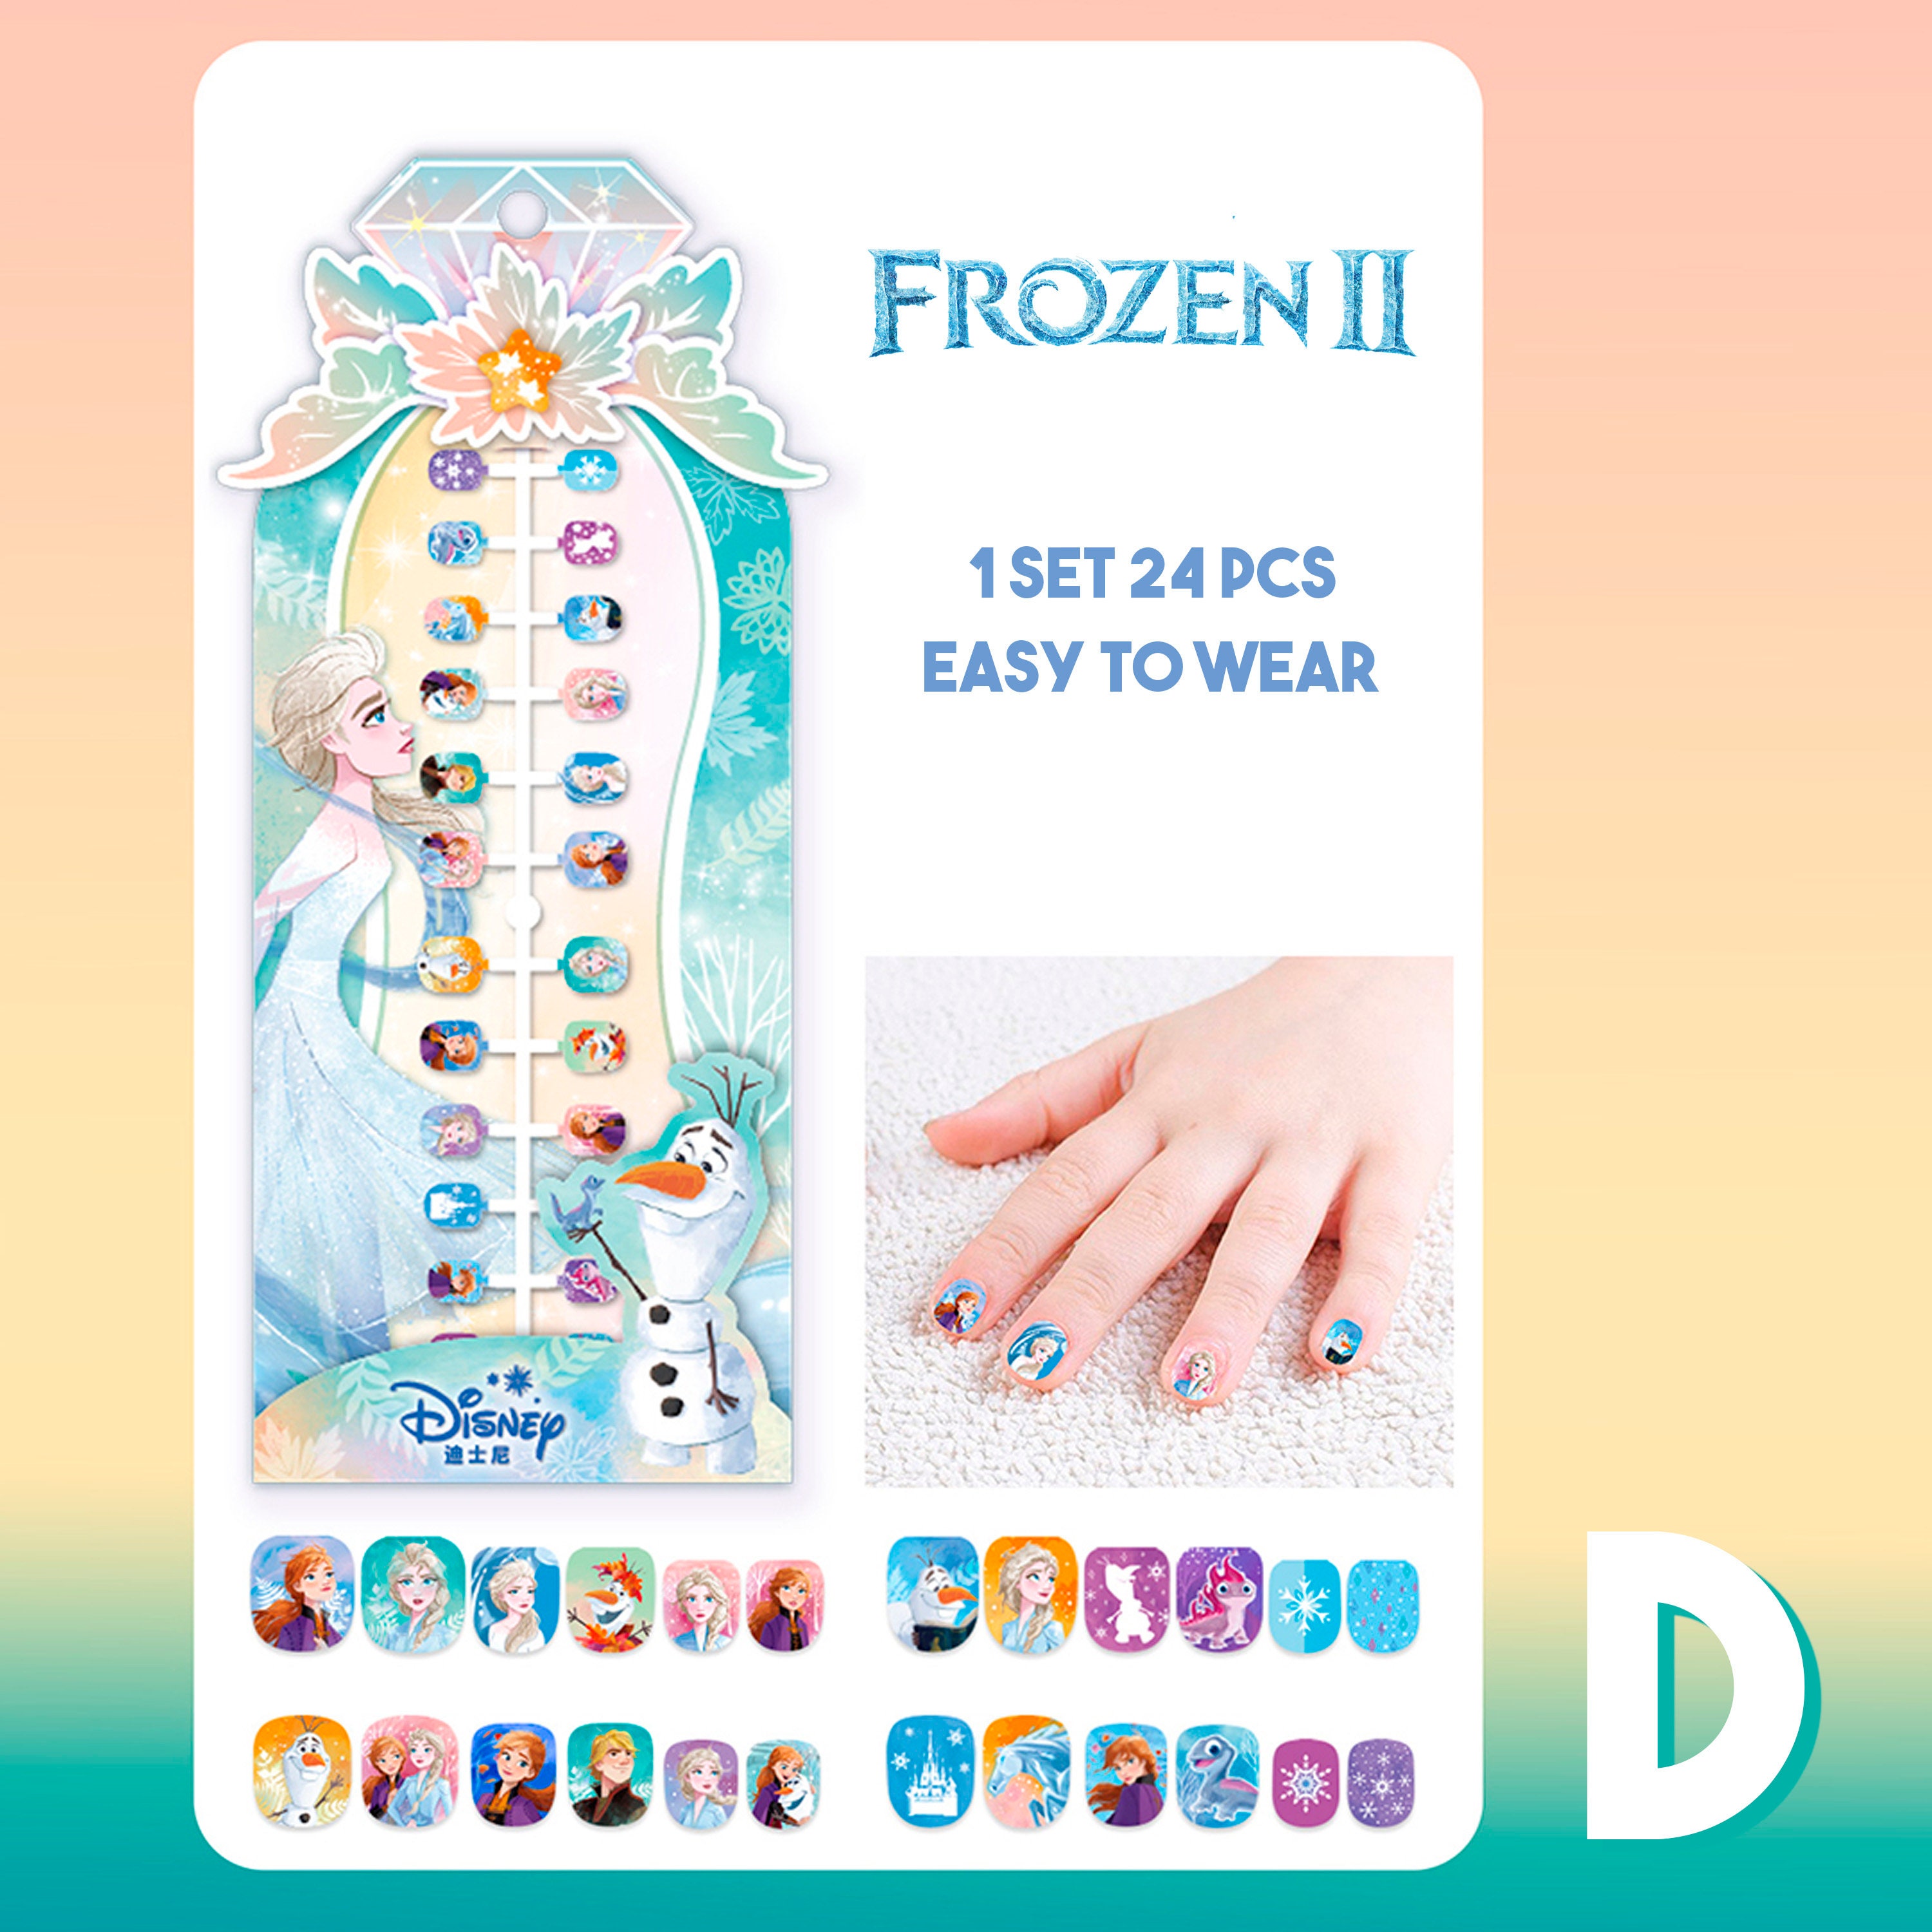 Olaf Nail Art Stickers Transfers Decals Set of 54 - A1215 | eBay